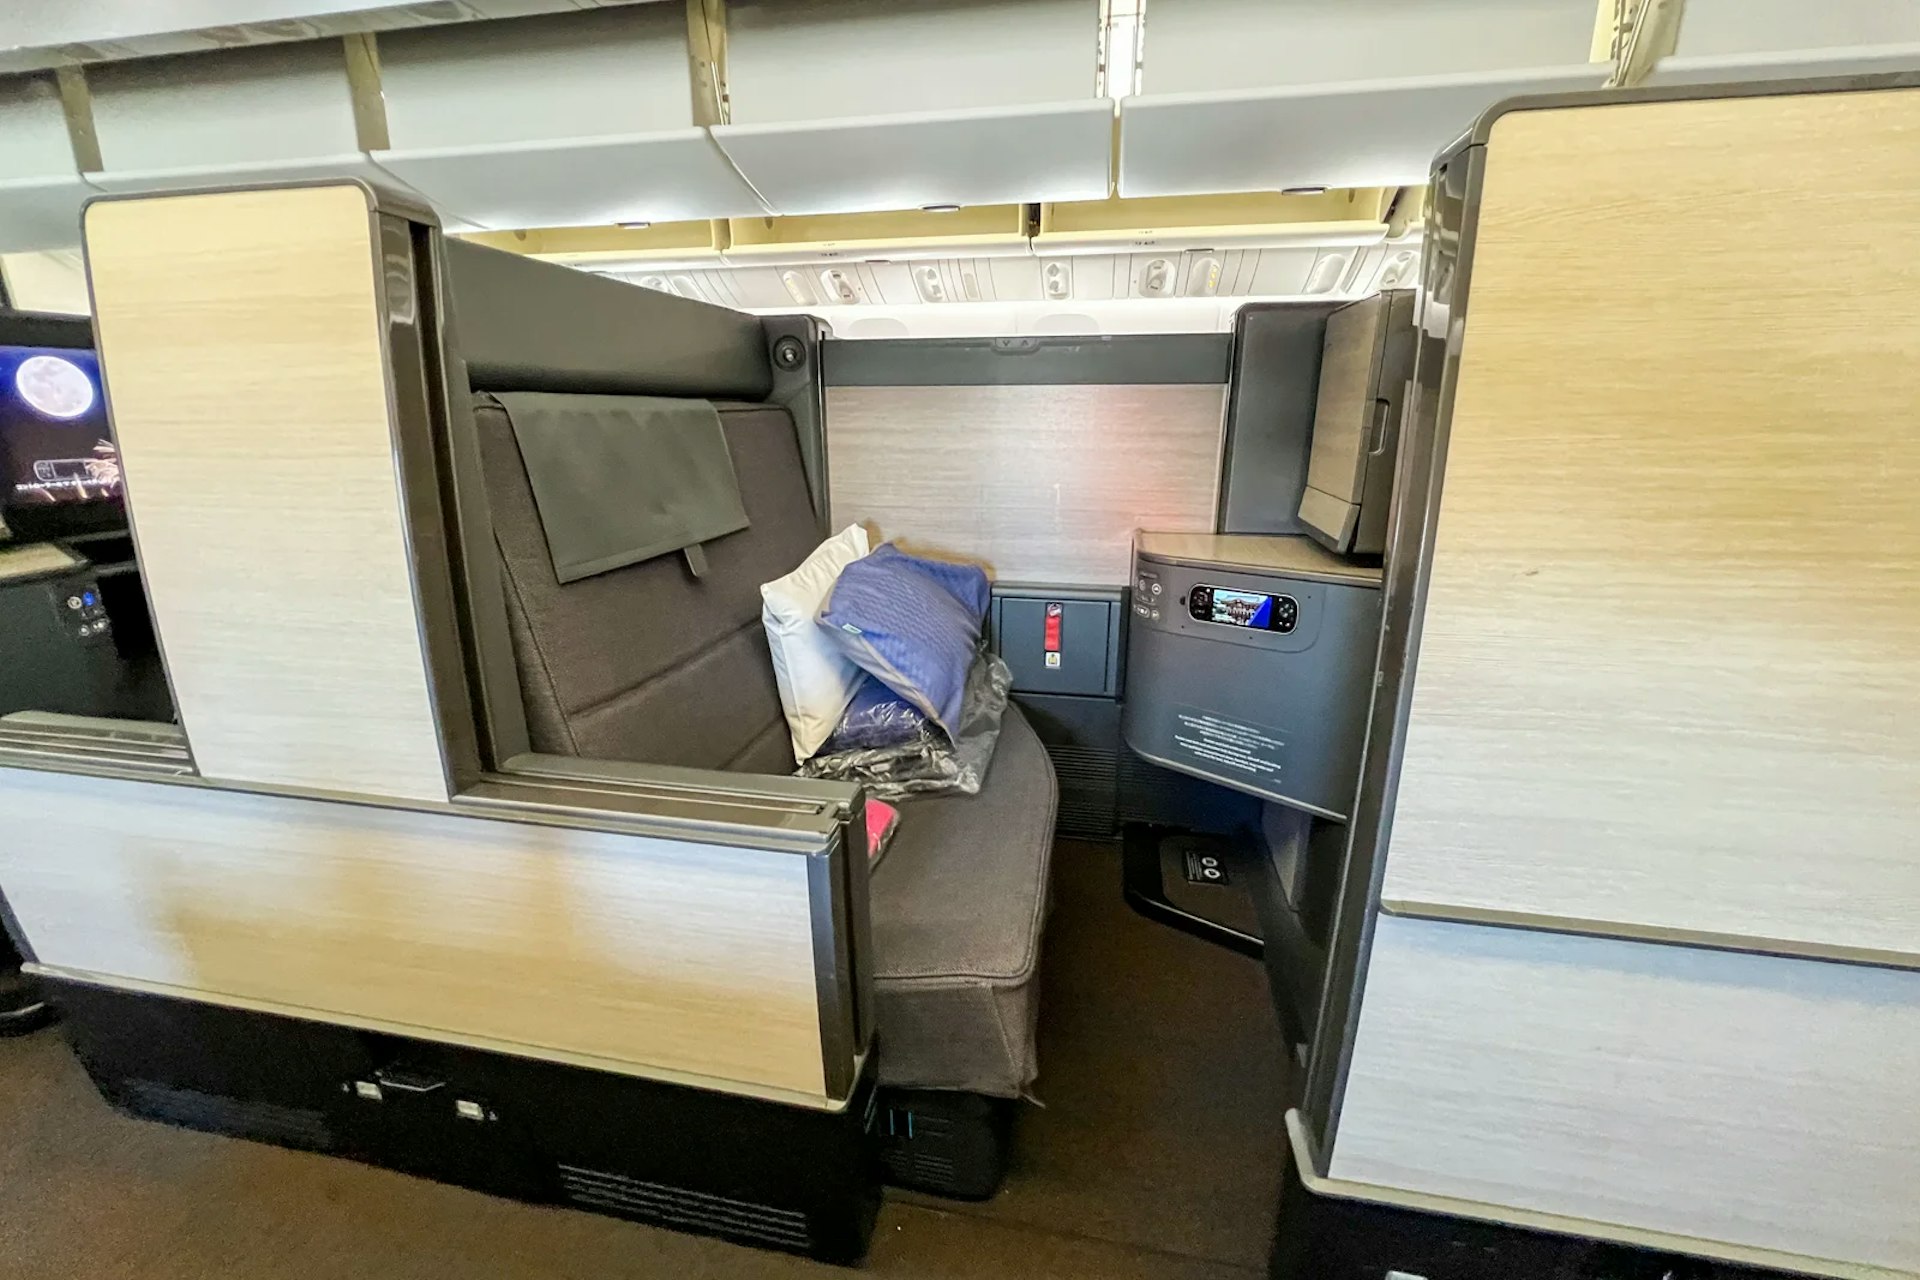 All Nippon Airways. You can fly to Japan in the airline’s esteemed “The Room” business class from just 80.000 miles round-trip